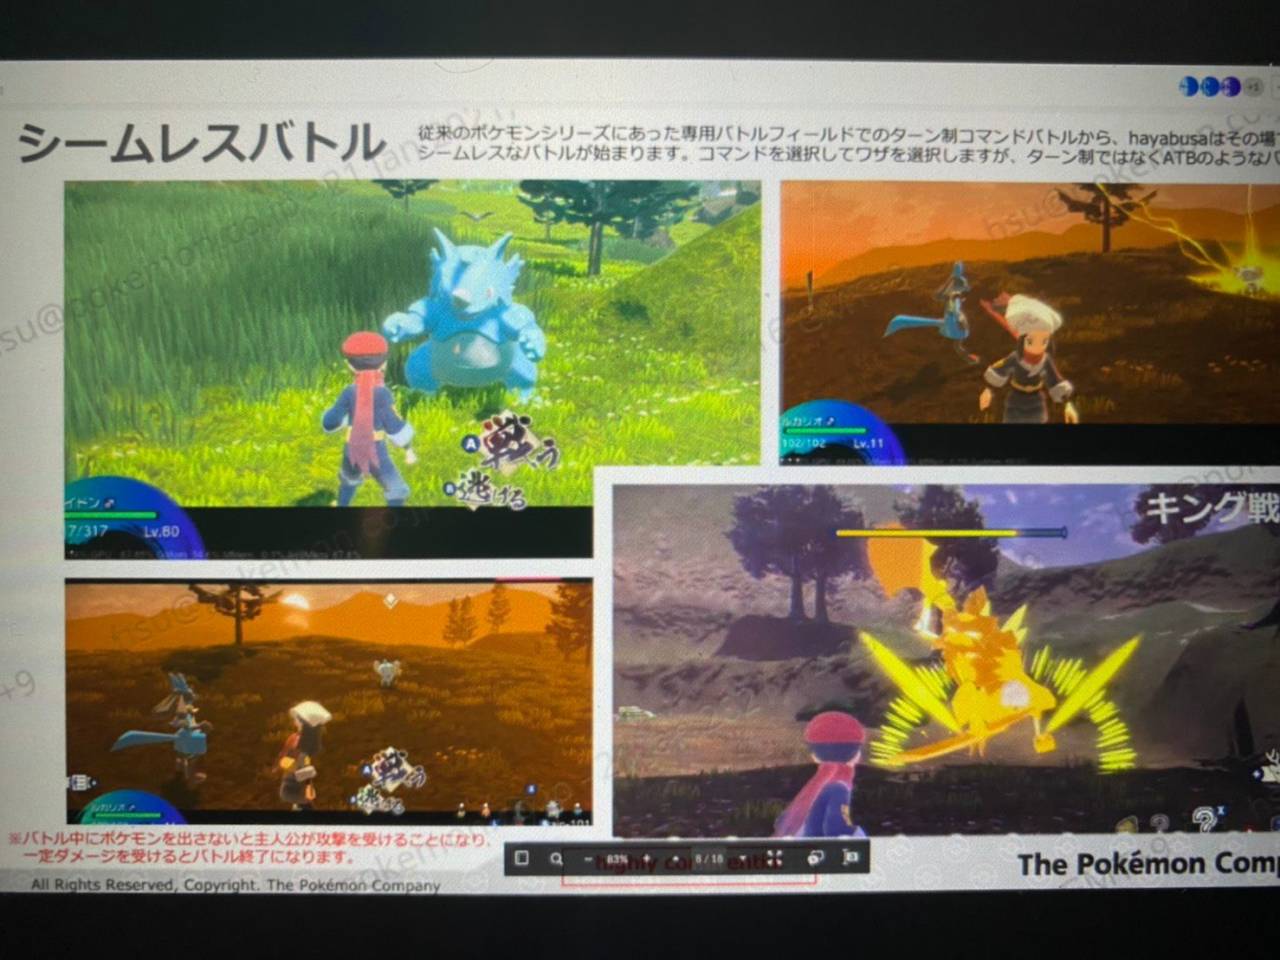 Pokémon video ‘leak’ seemingly reveals openworld game coming to Switch